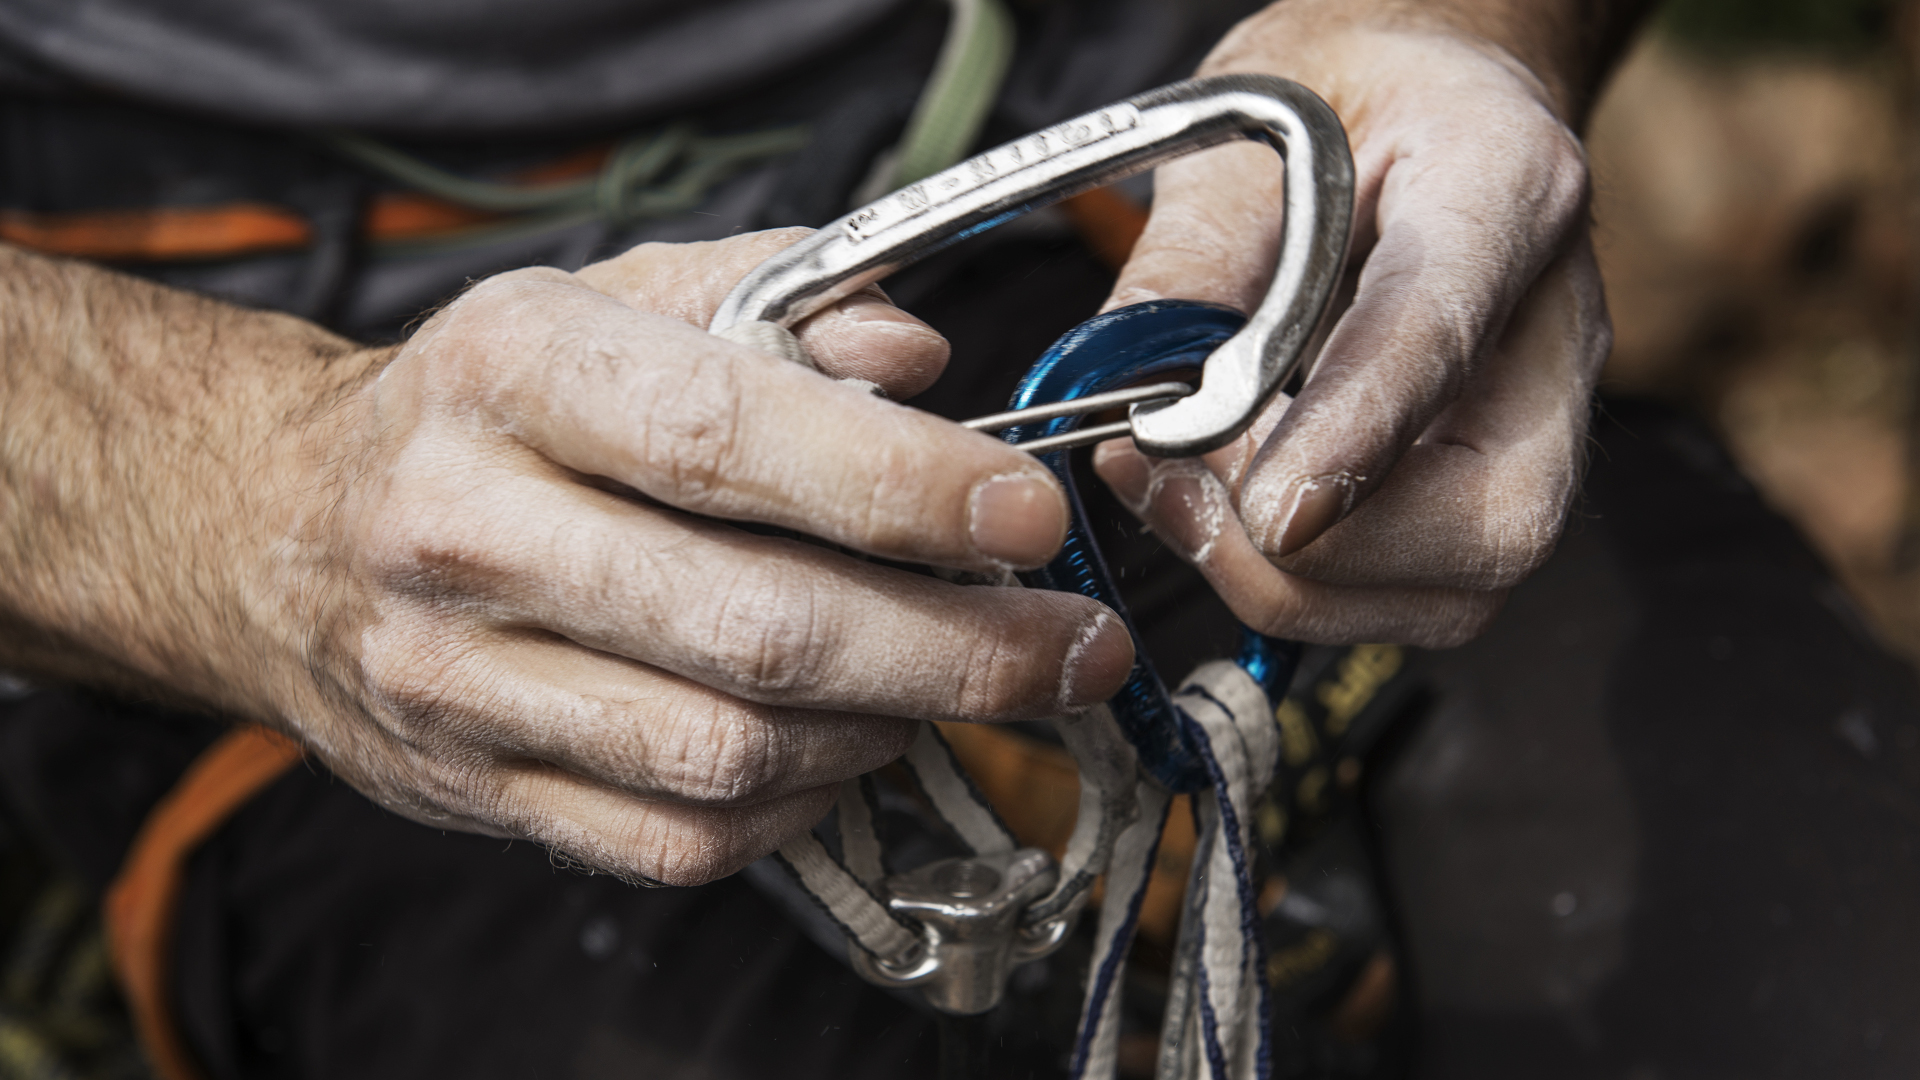 Uses for a carabiner: meet the mainstay of rock climbing gear